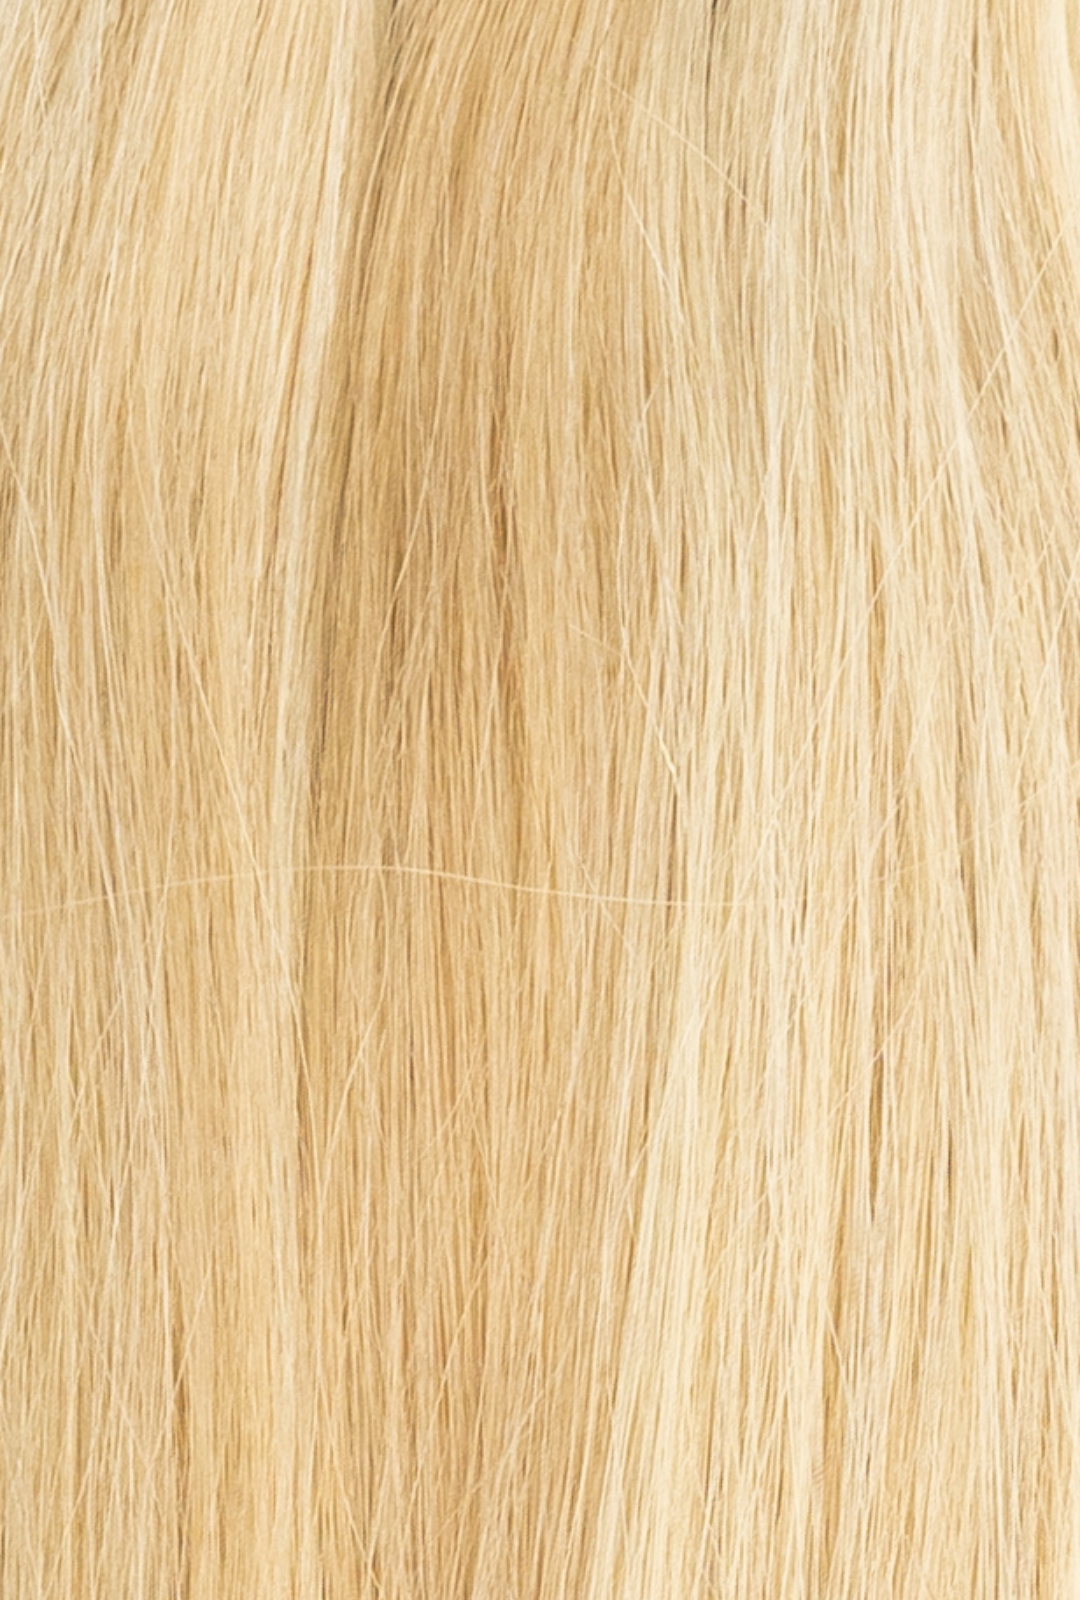 Laced Hair Hand Tied Weft Extensions Dimensional #16/22 (Buttercream)